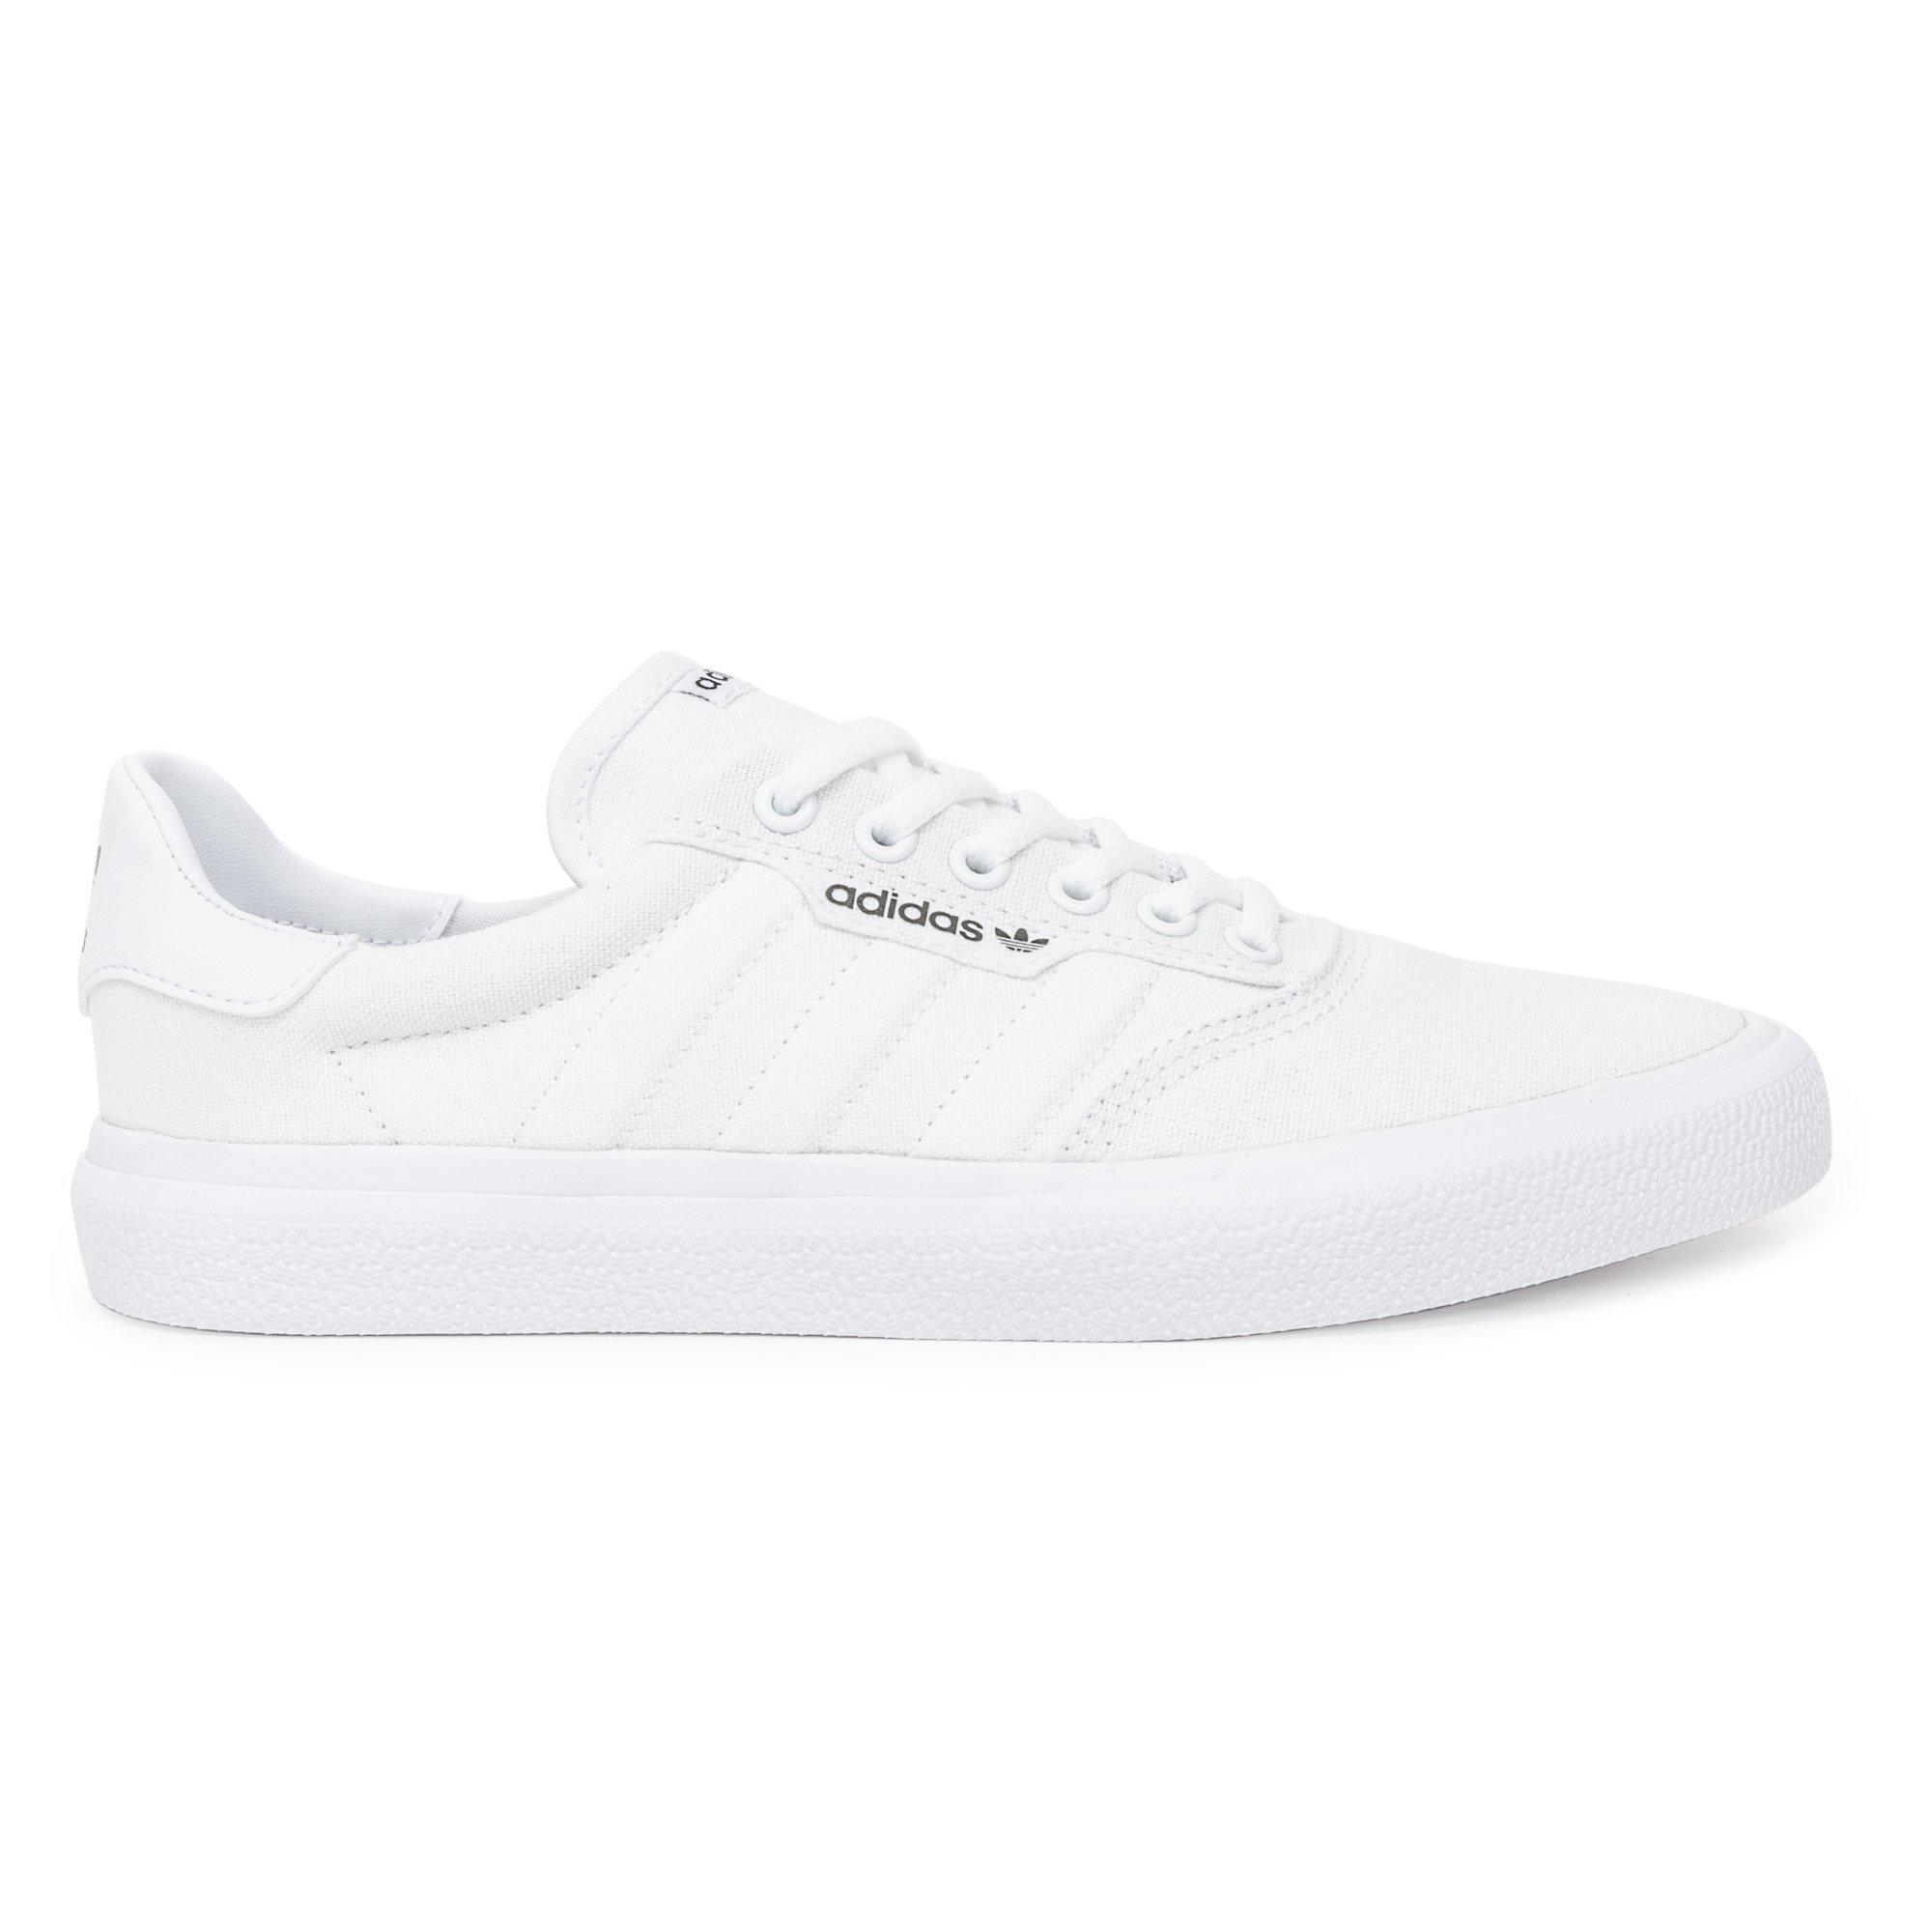 adidas Canvas 3mc Vulc Shoes in White for Men - Lyst